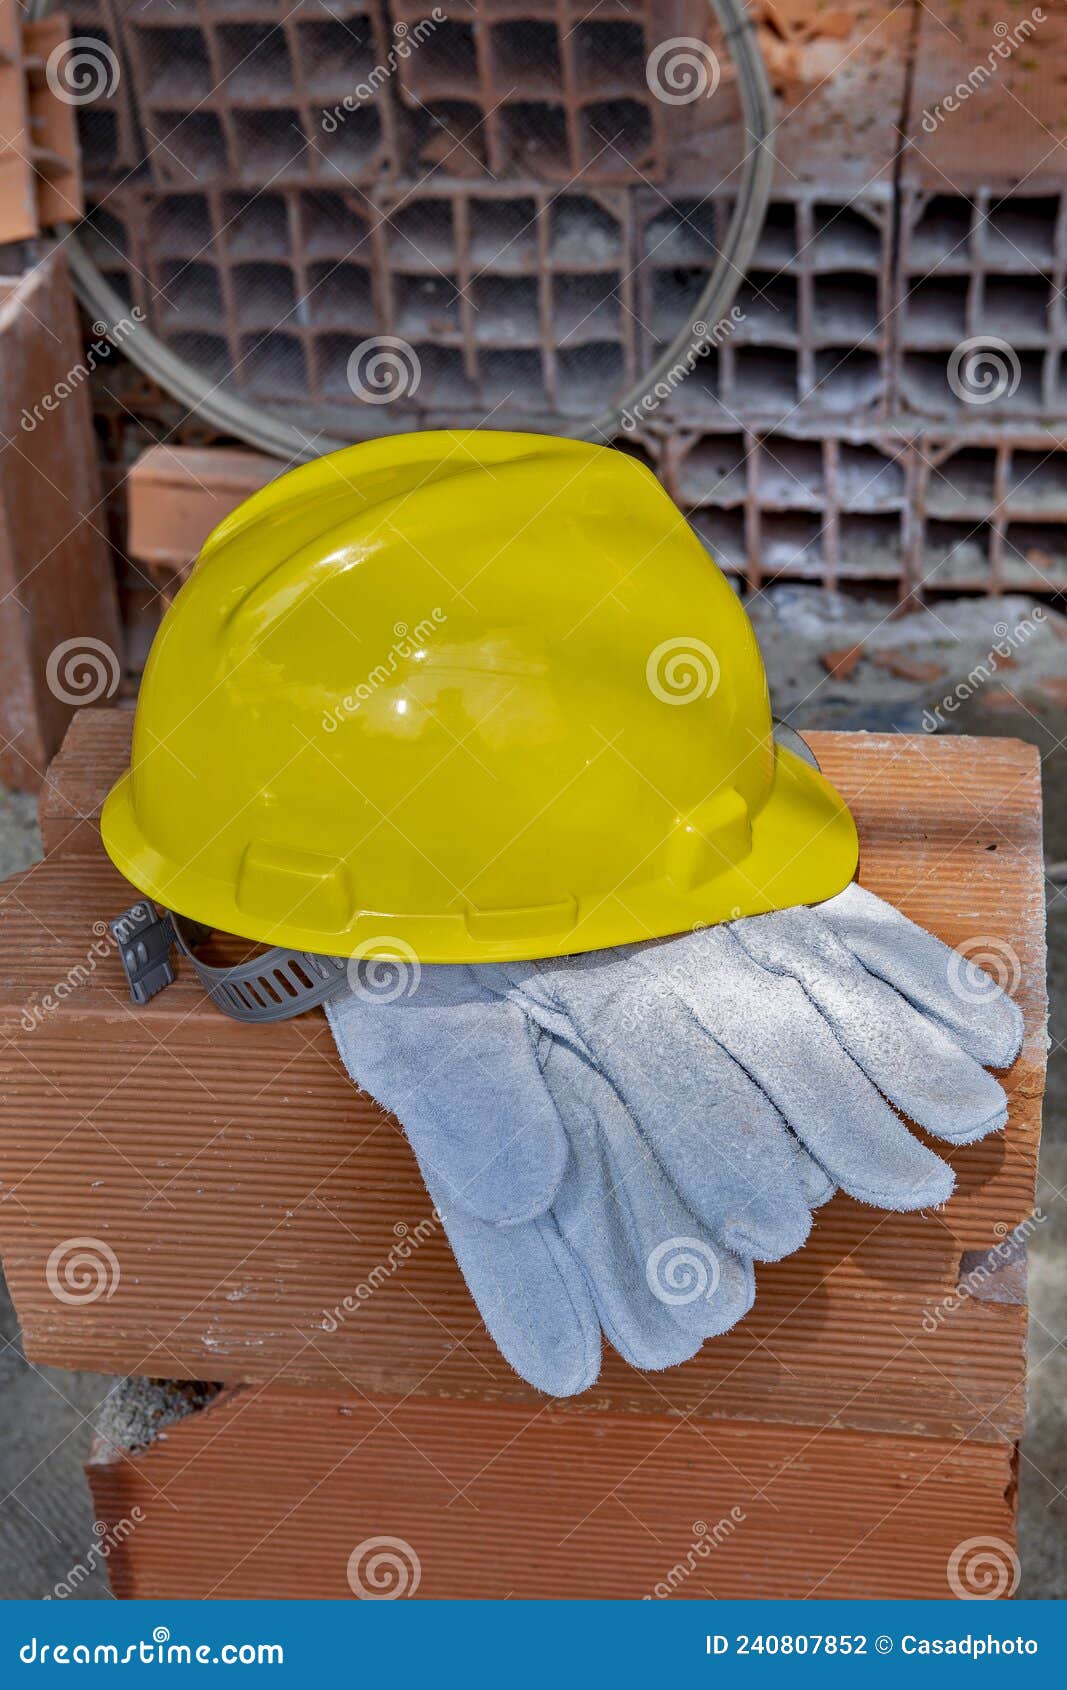 gloves and protection helmet on pile of bricks